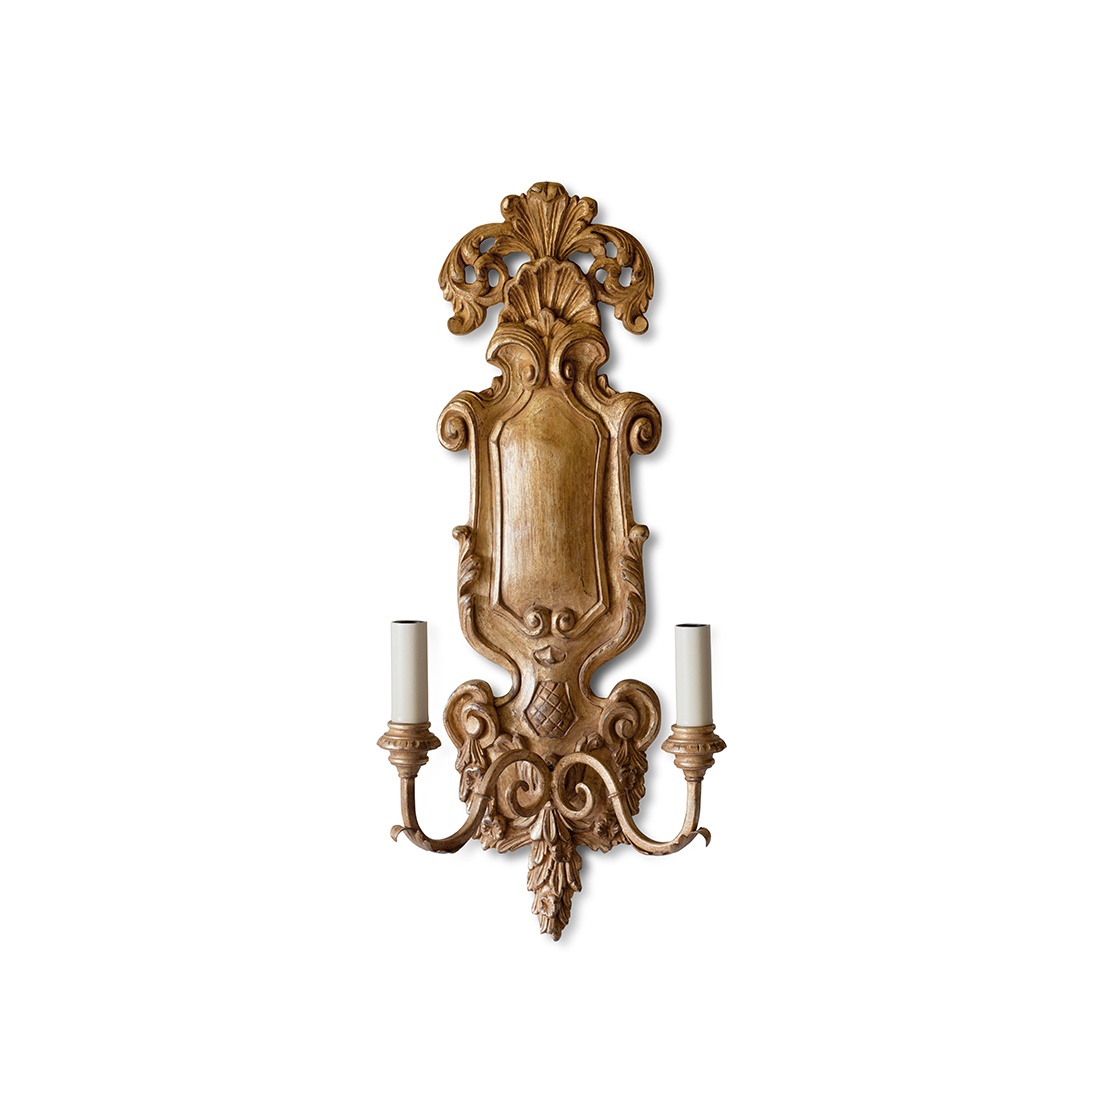 Rococo wall light in Burnt gold - Beaumont & Fletcher